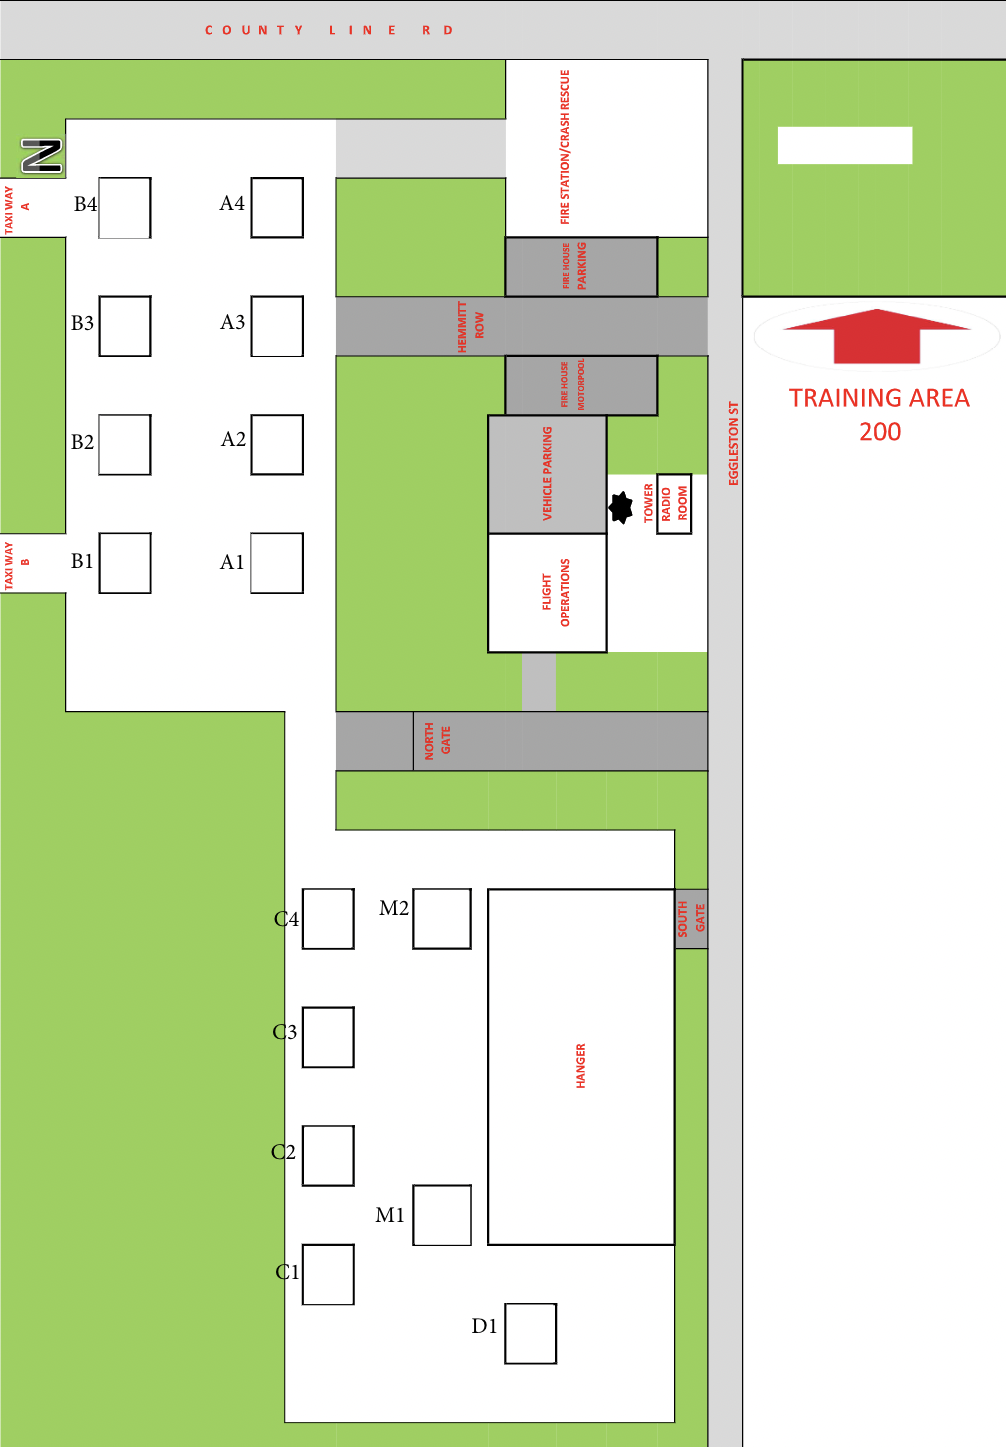 Himsel Army Airfield Training Area Map